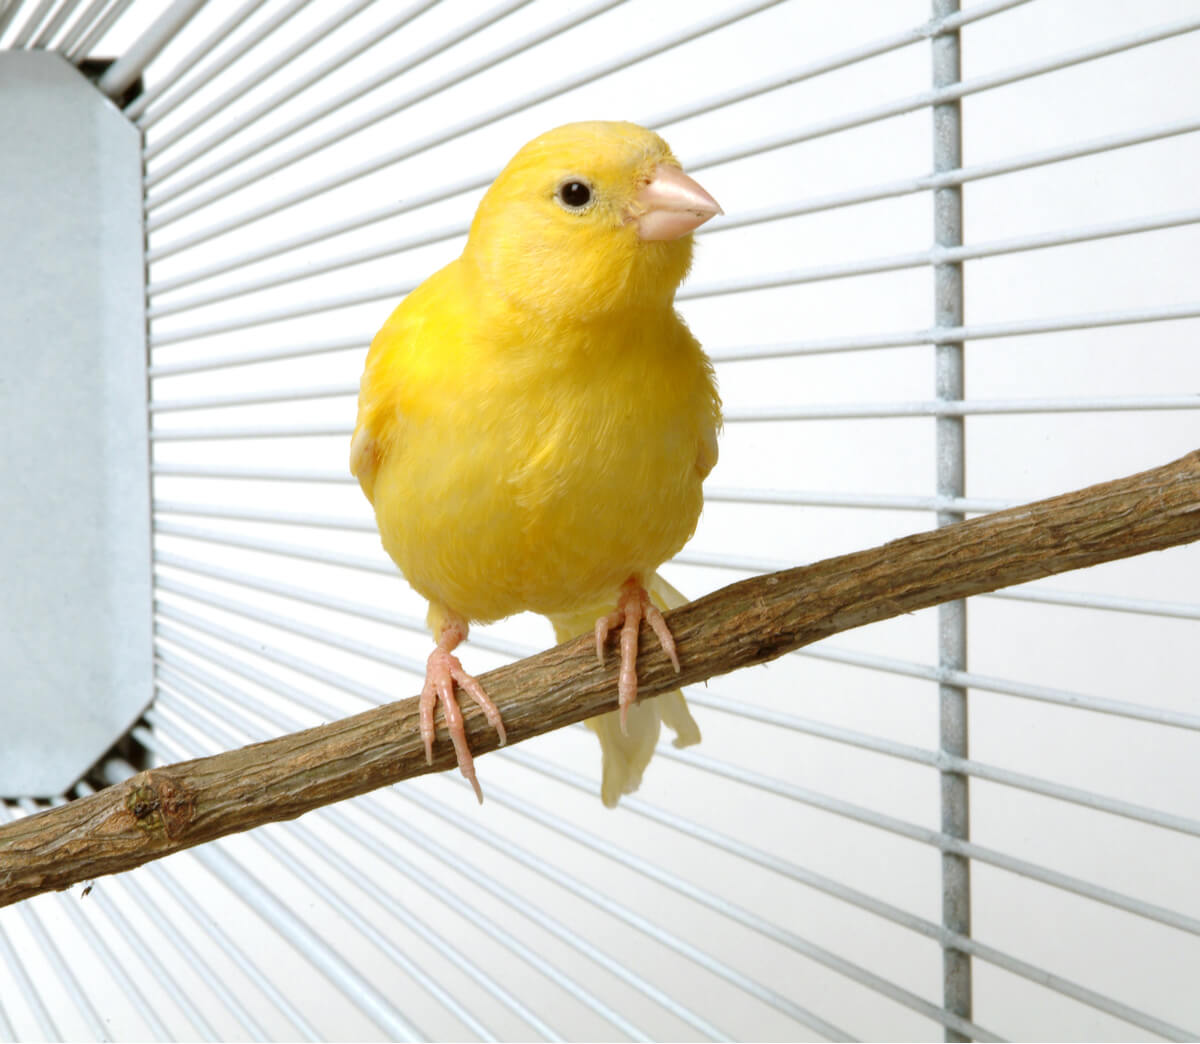 The canary's feathers fall out when she molts.